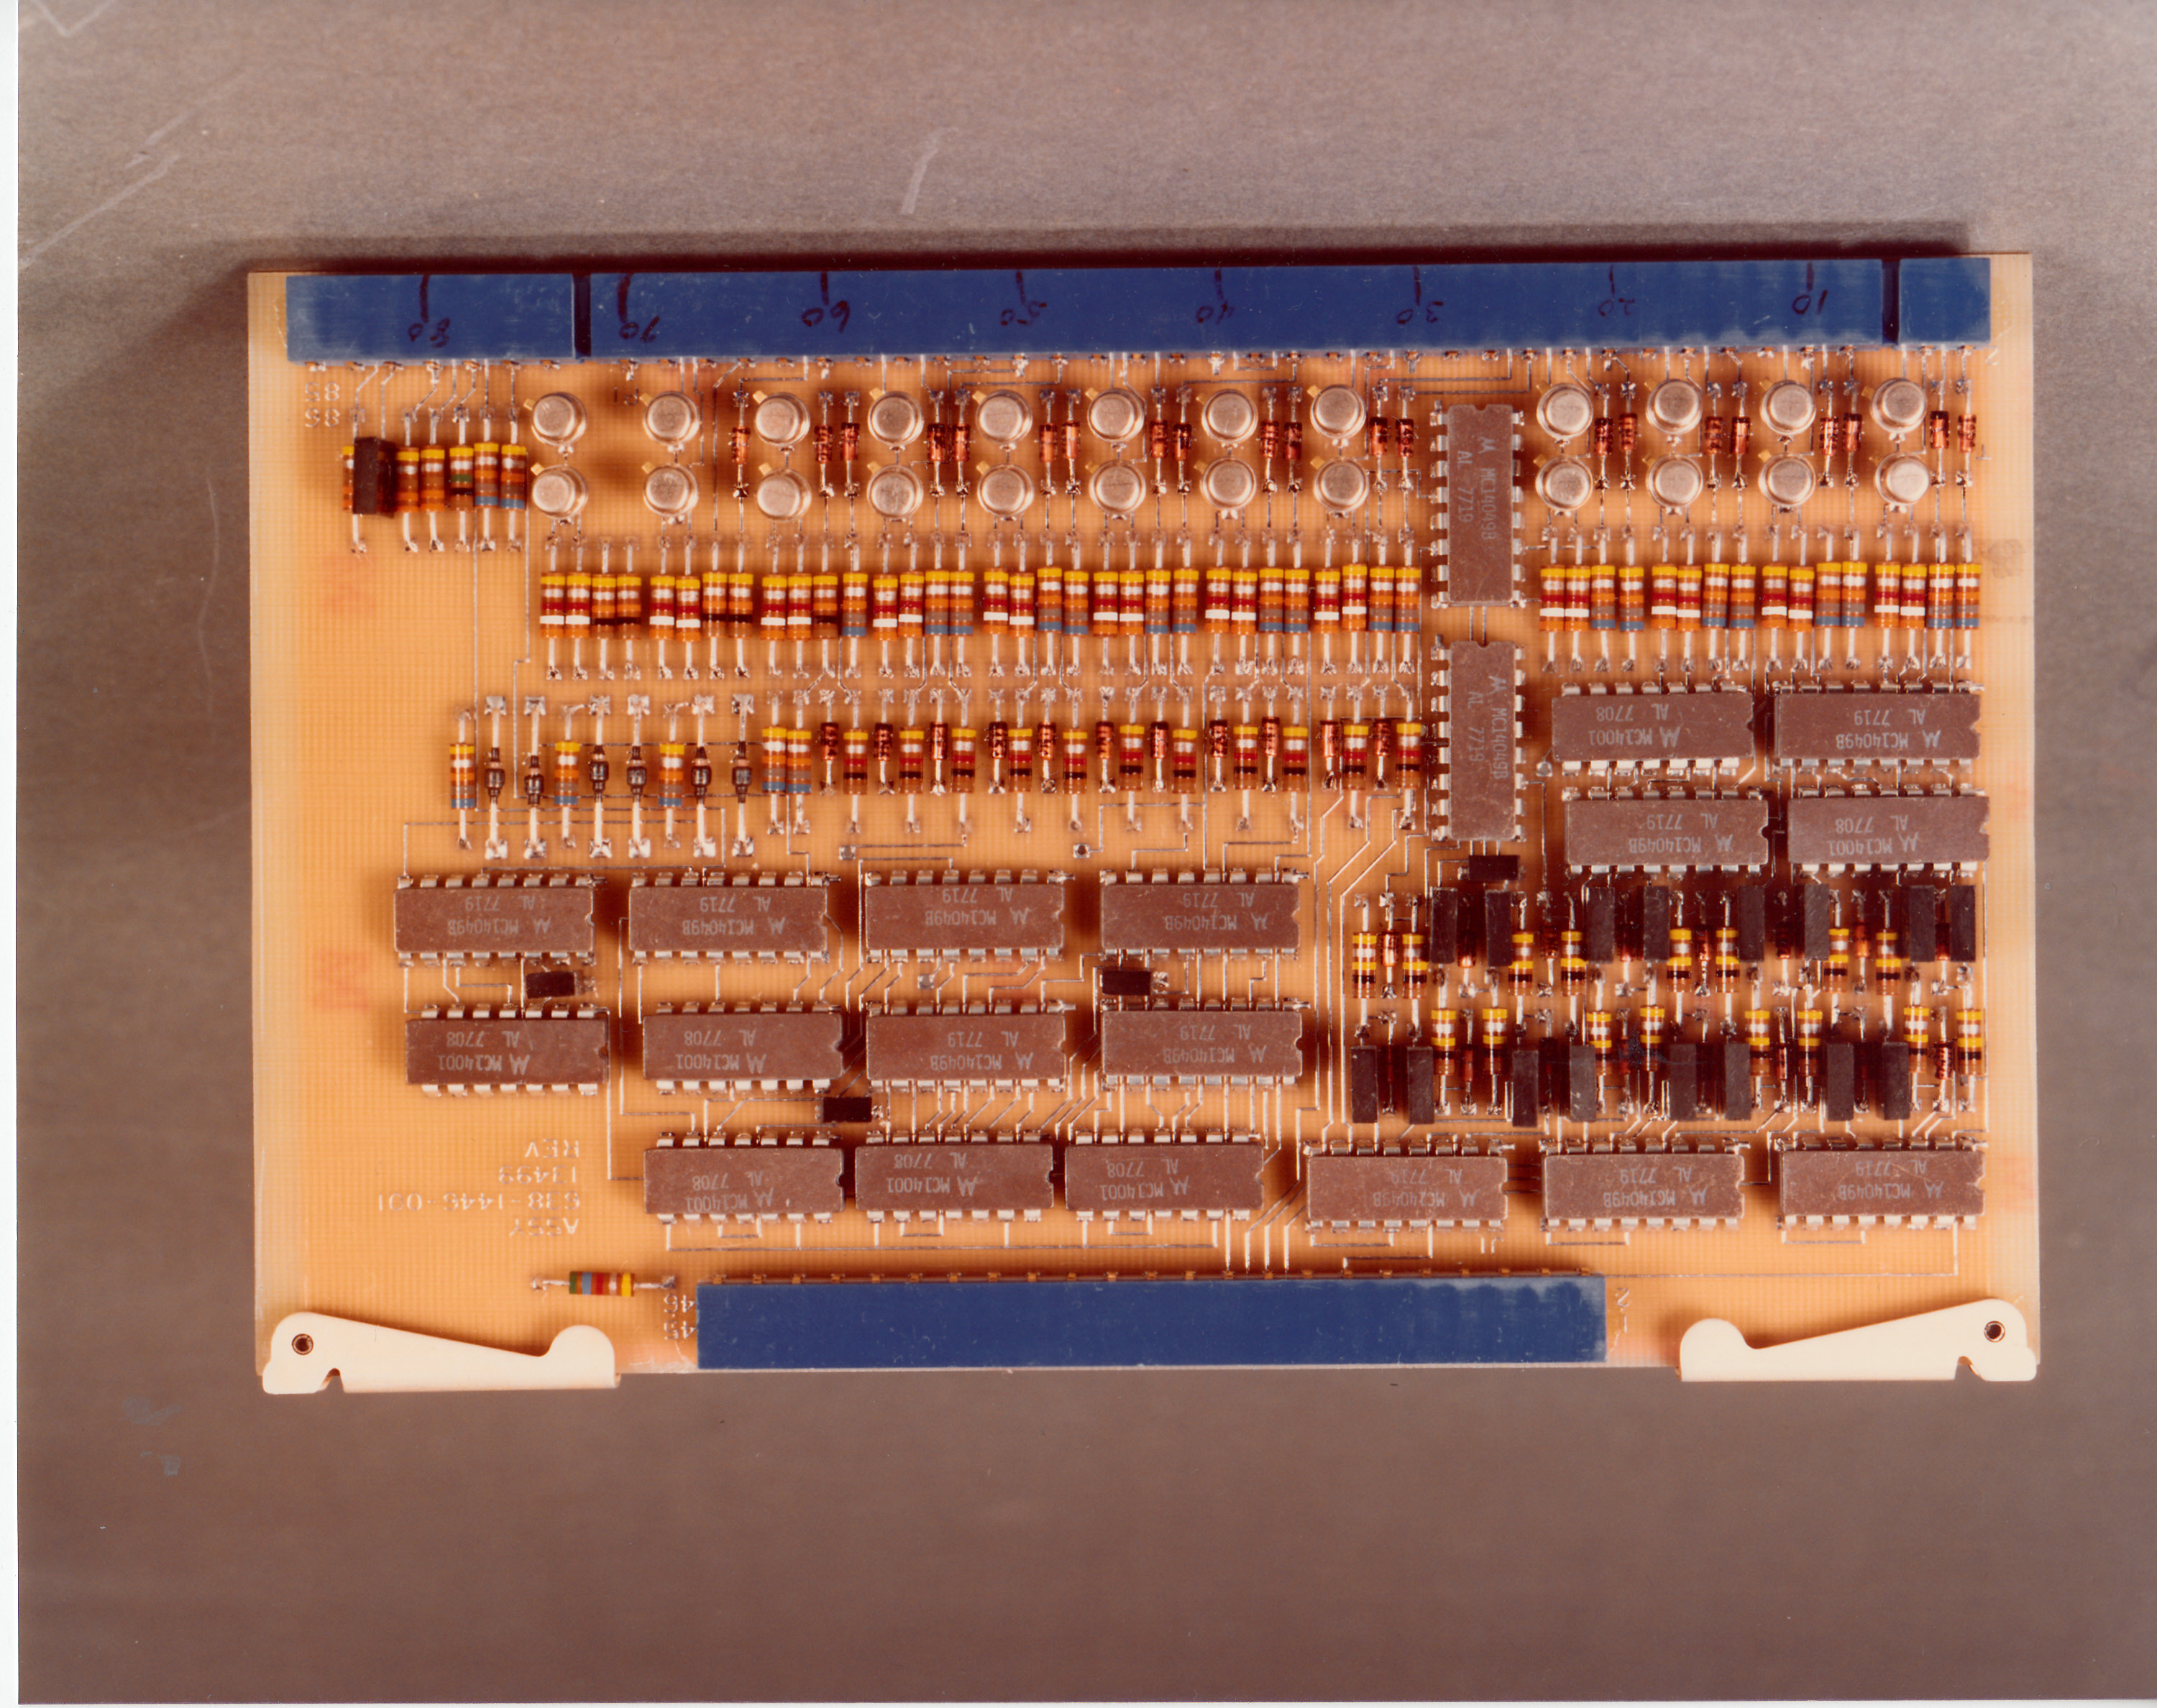 Rockwell Collins Computer card